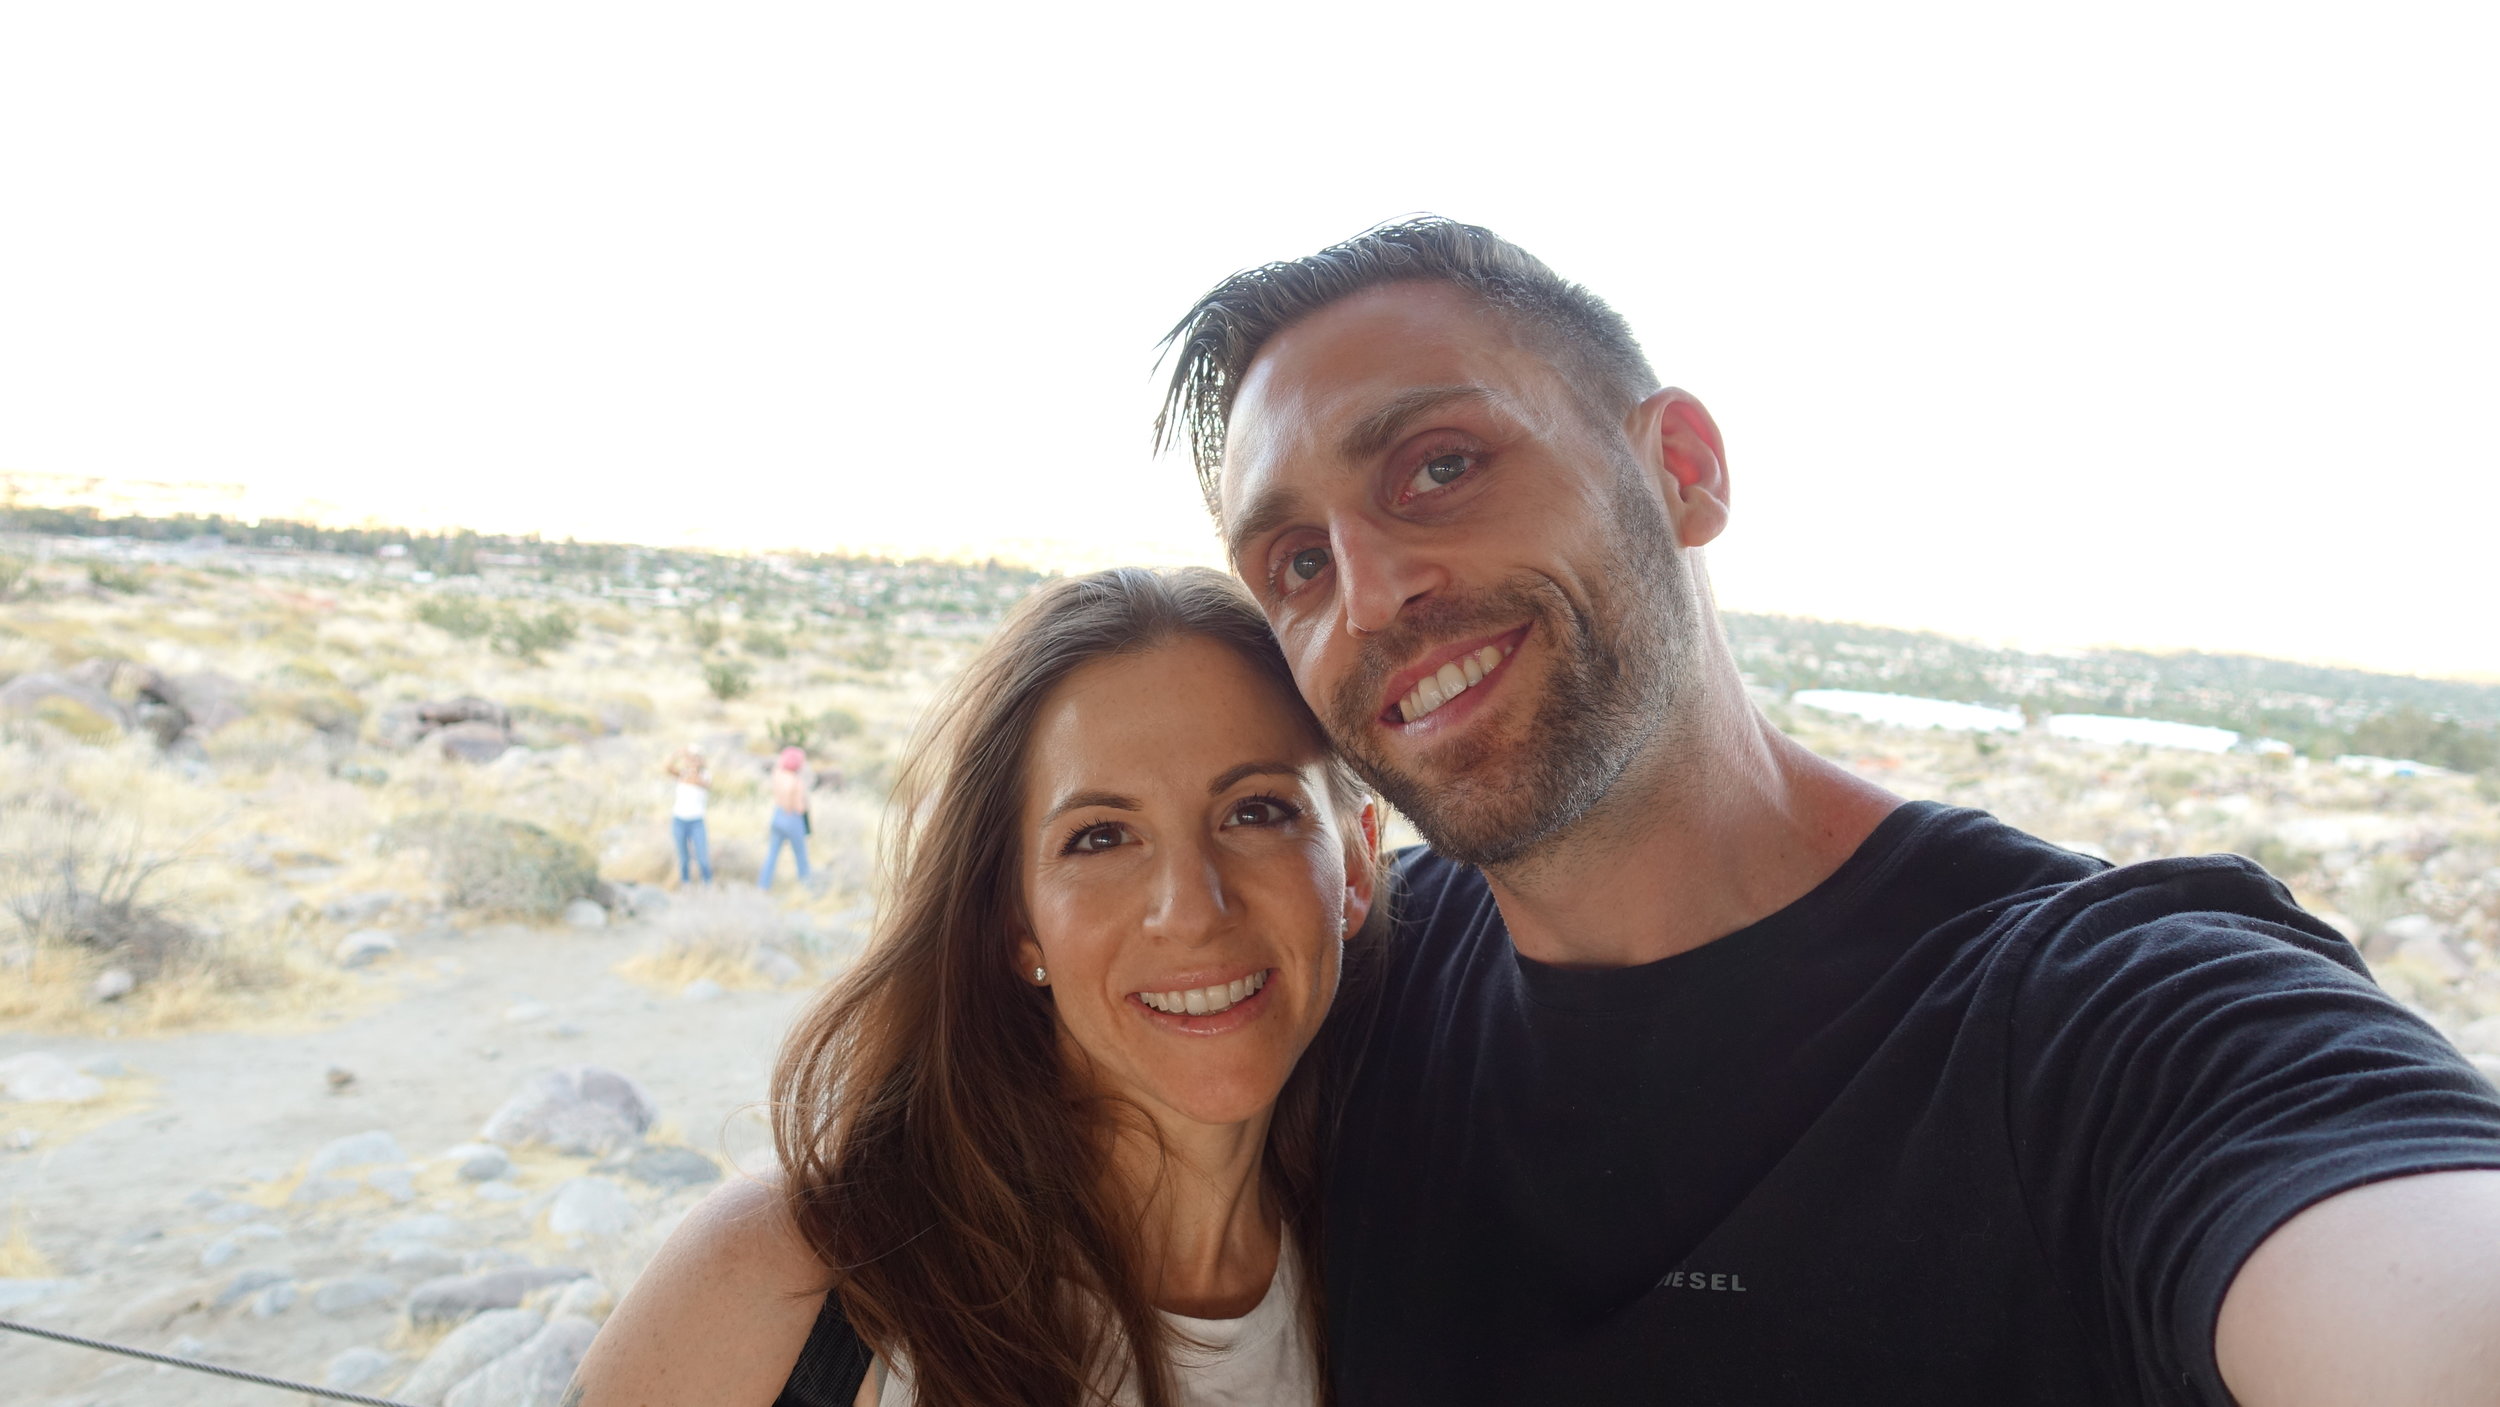 My husband Jay and his journey with Crohn's